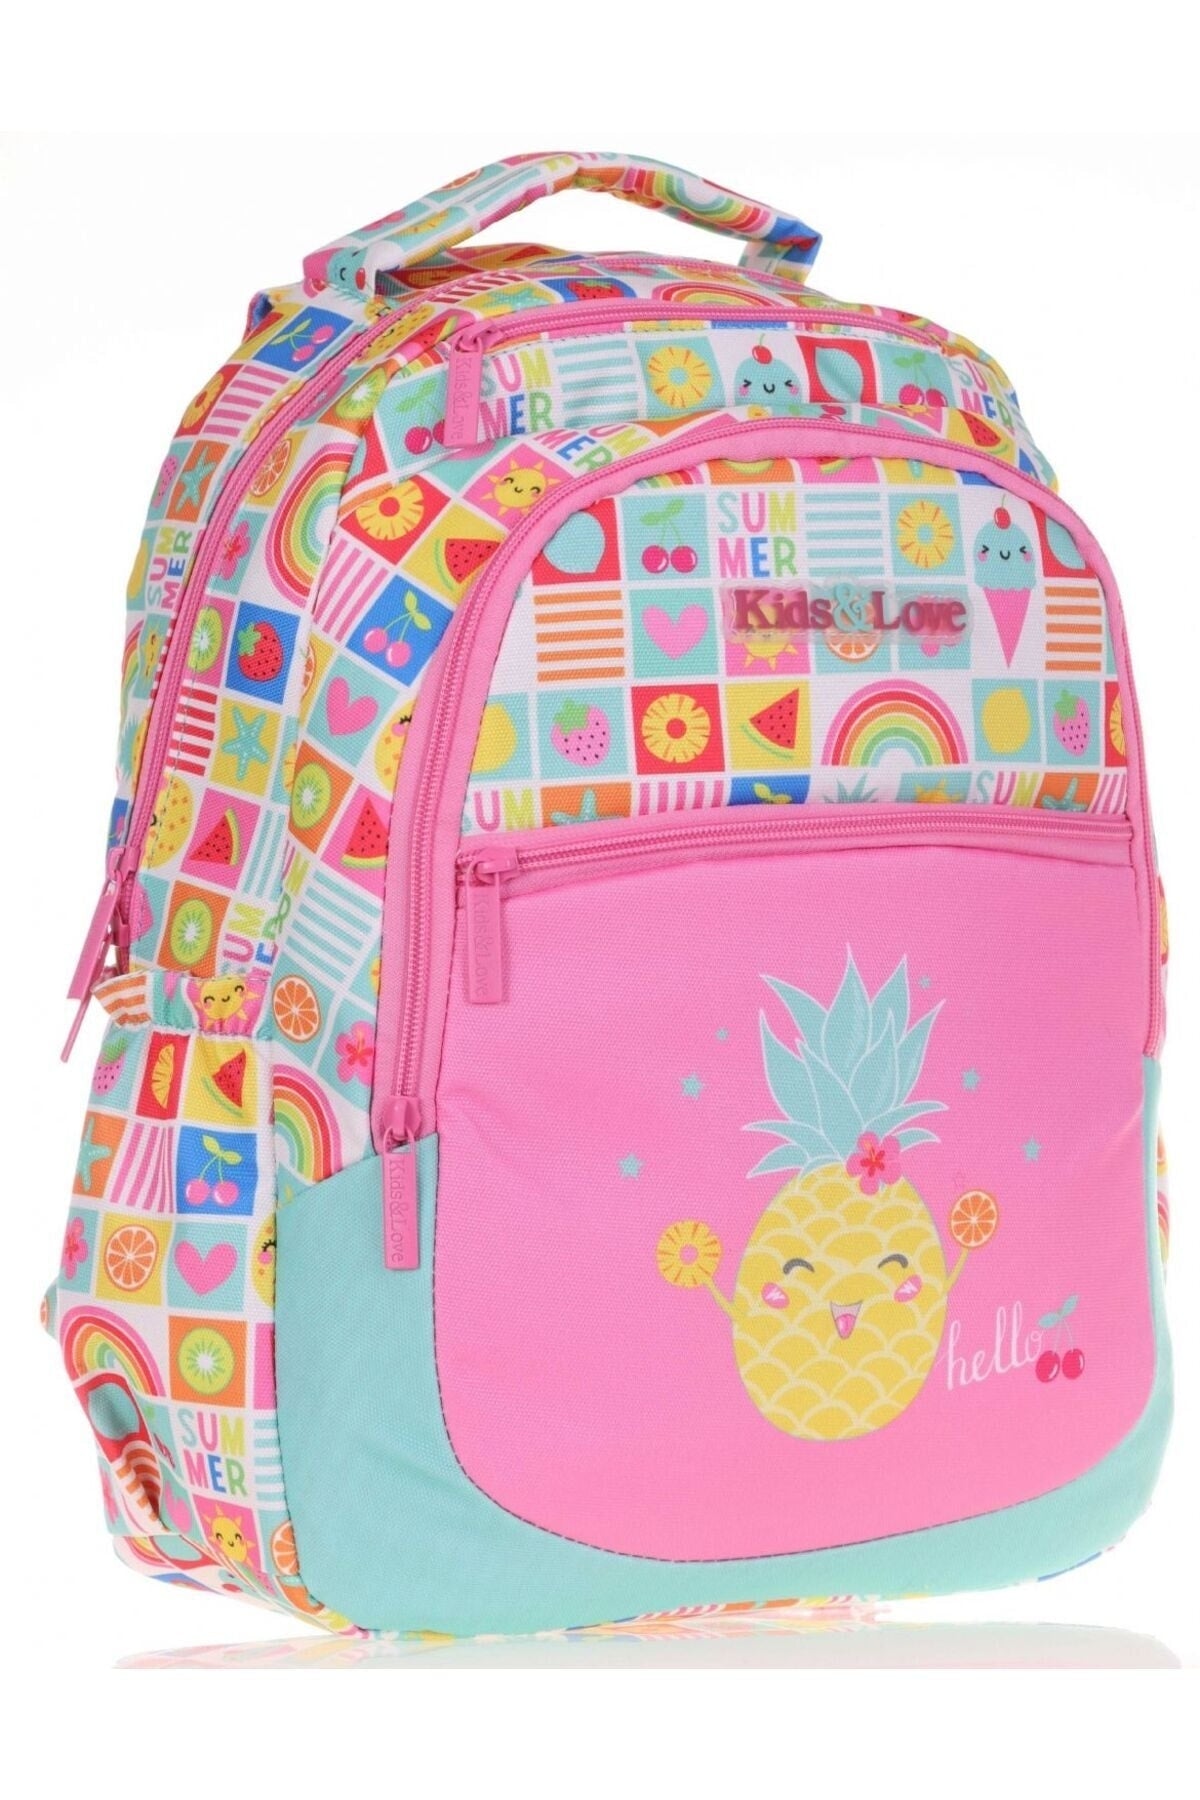 Kids&Love Pink Pineapple Primary School Bag and Lunch Set - Girls